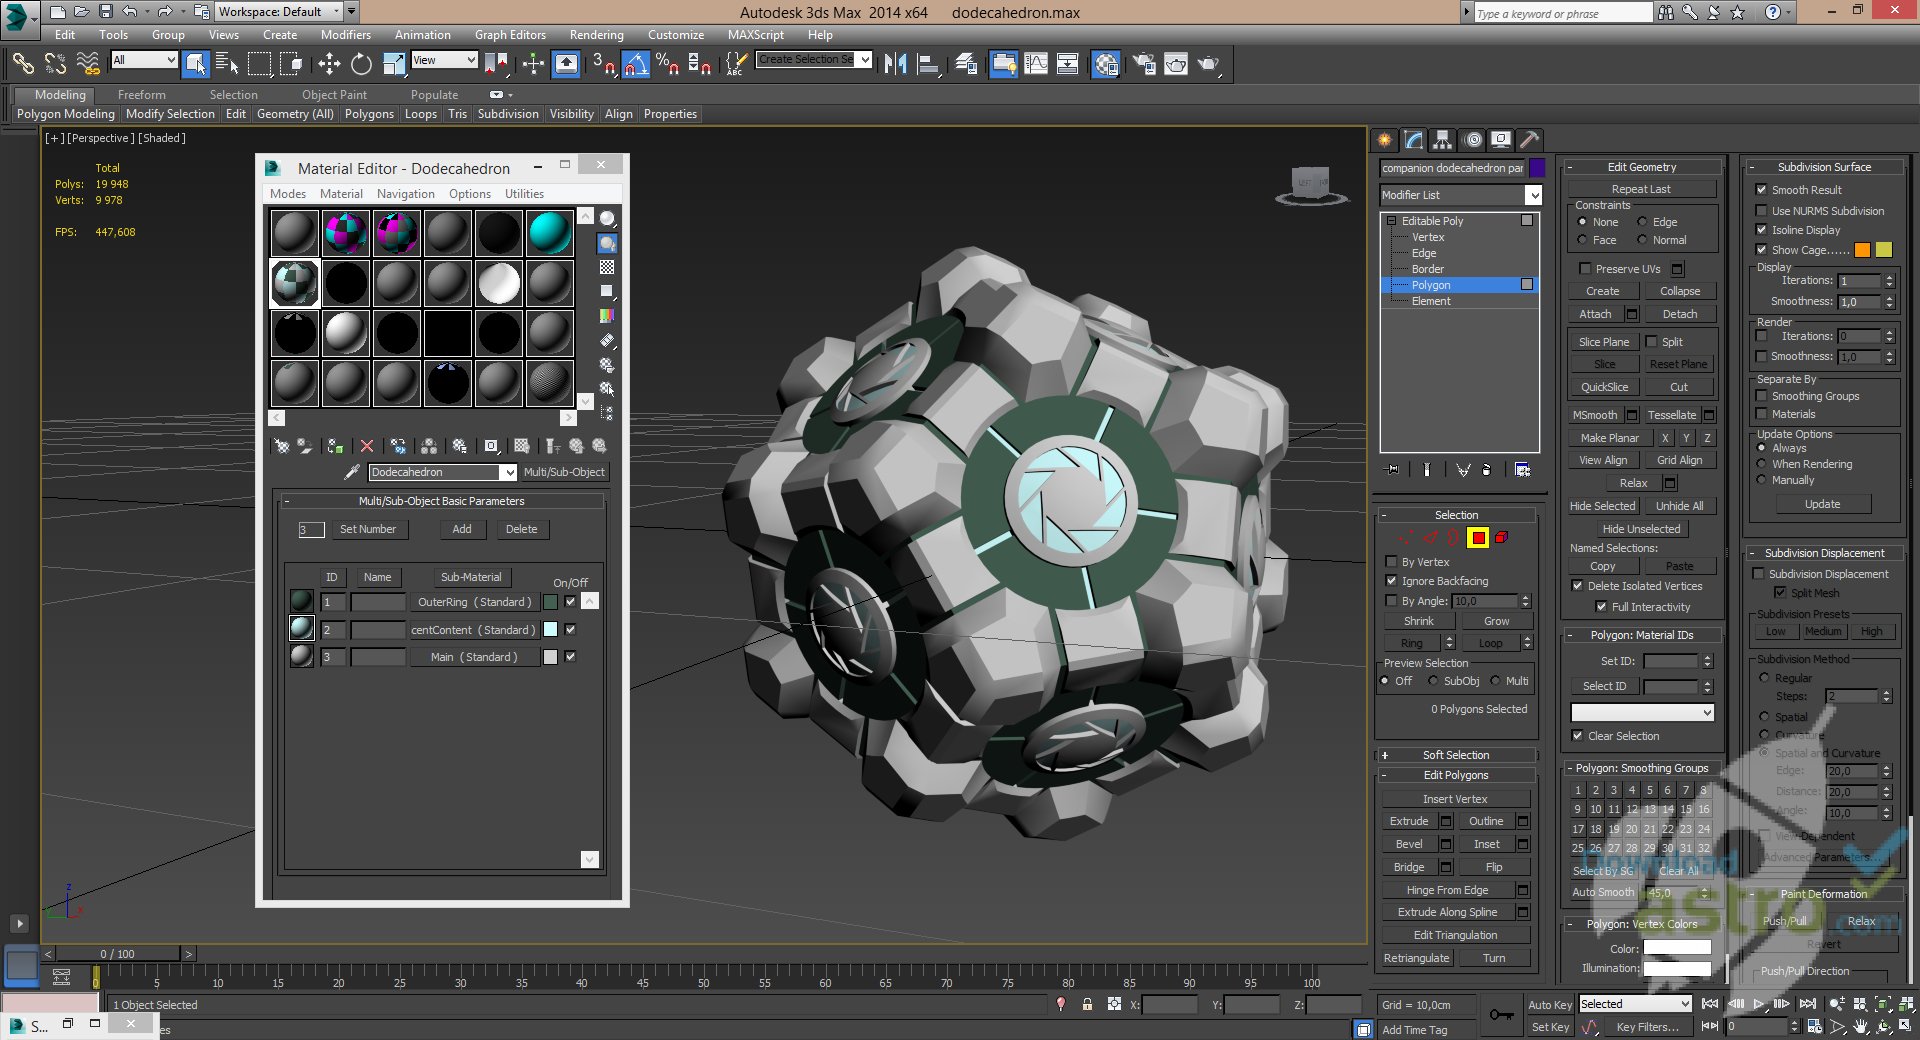 3ds max full. free download